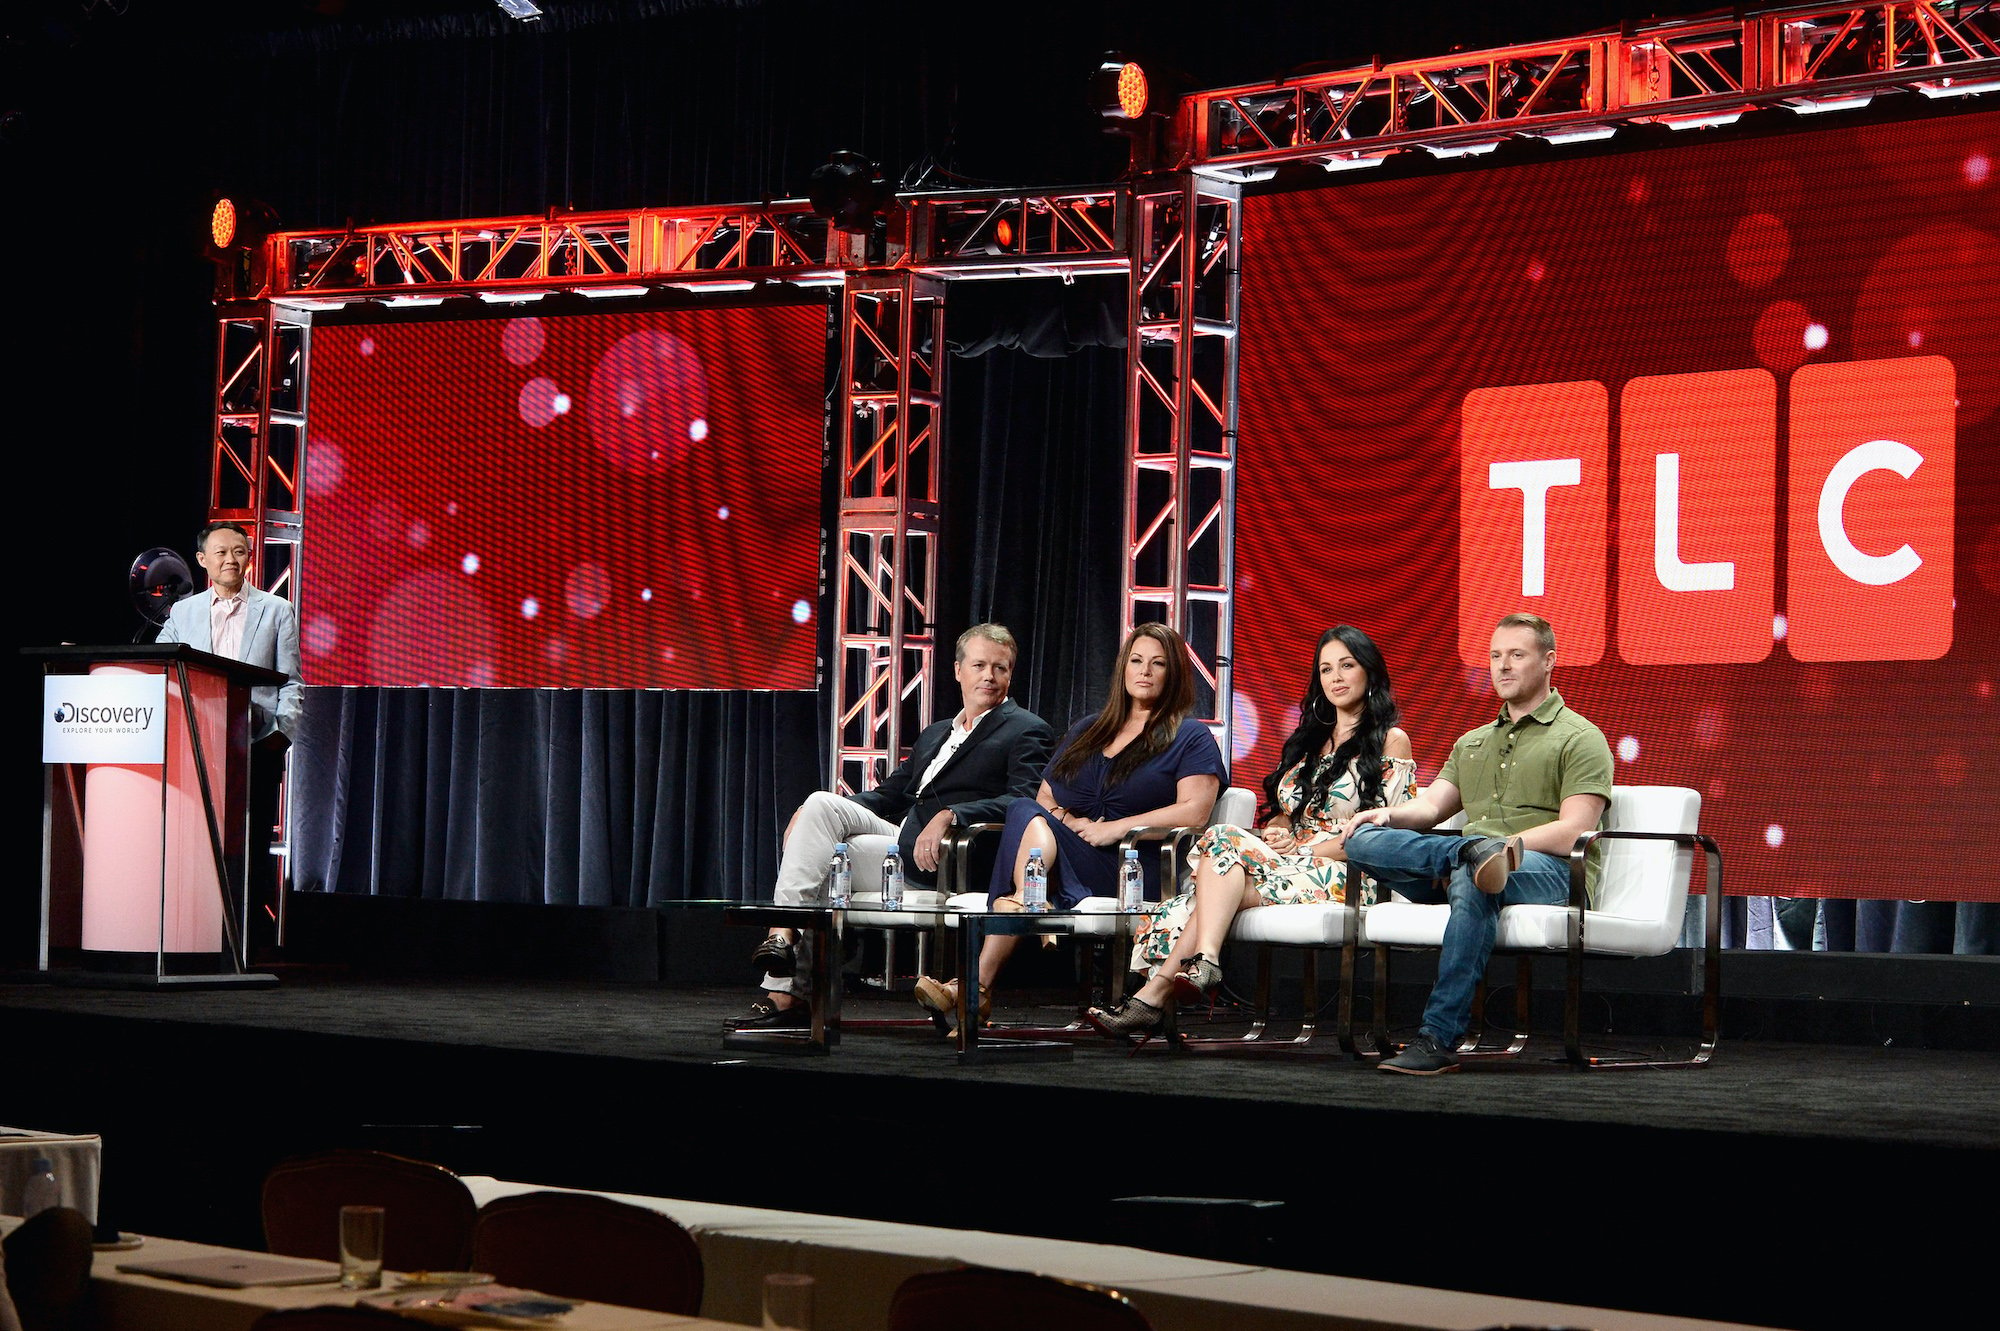 TLC executives gathered on stage at a conference